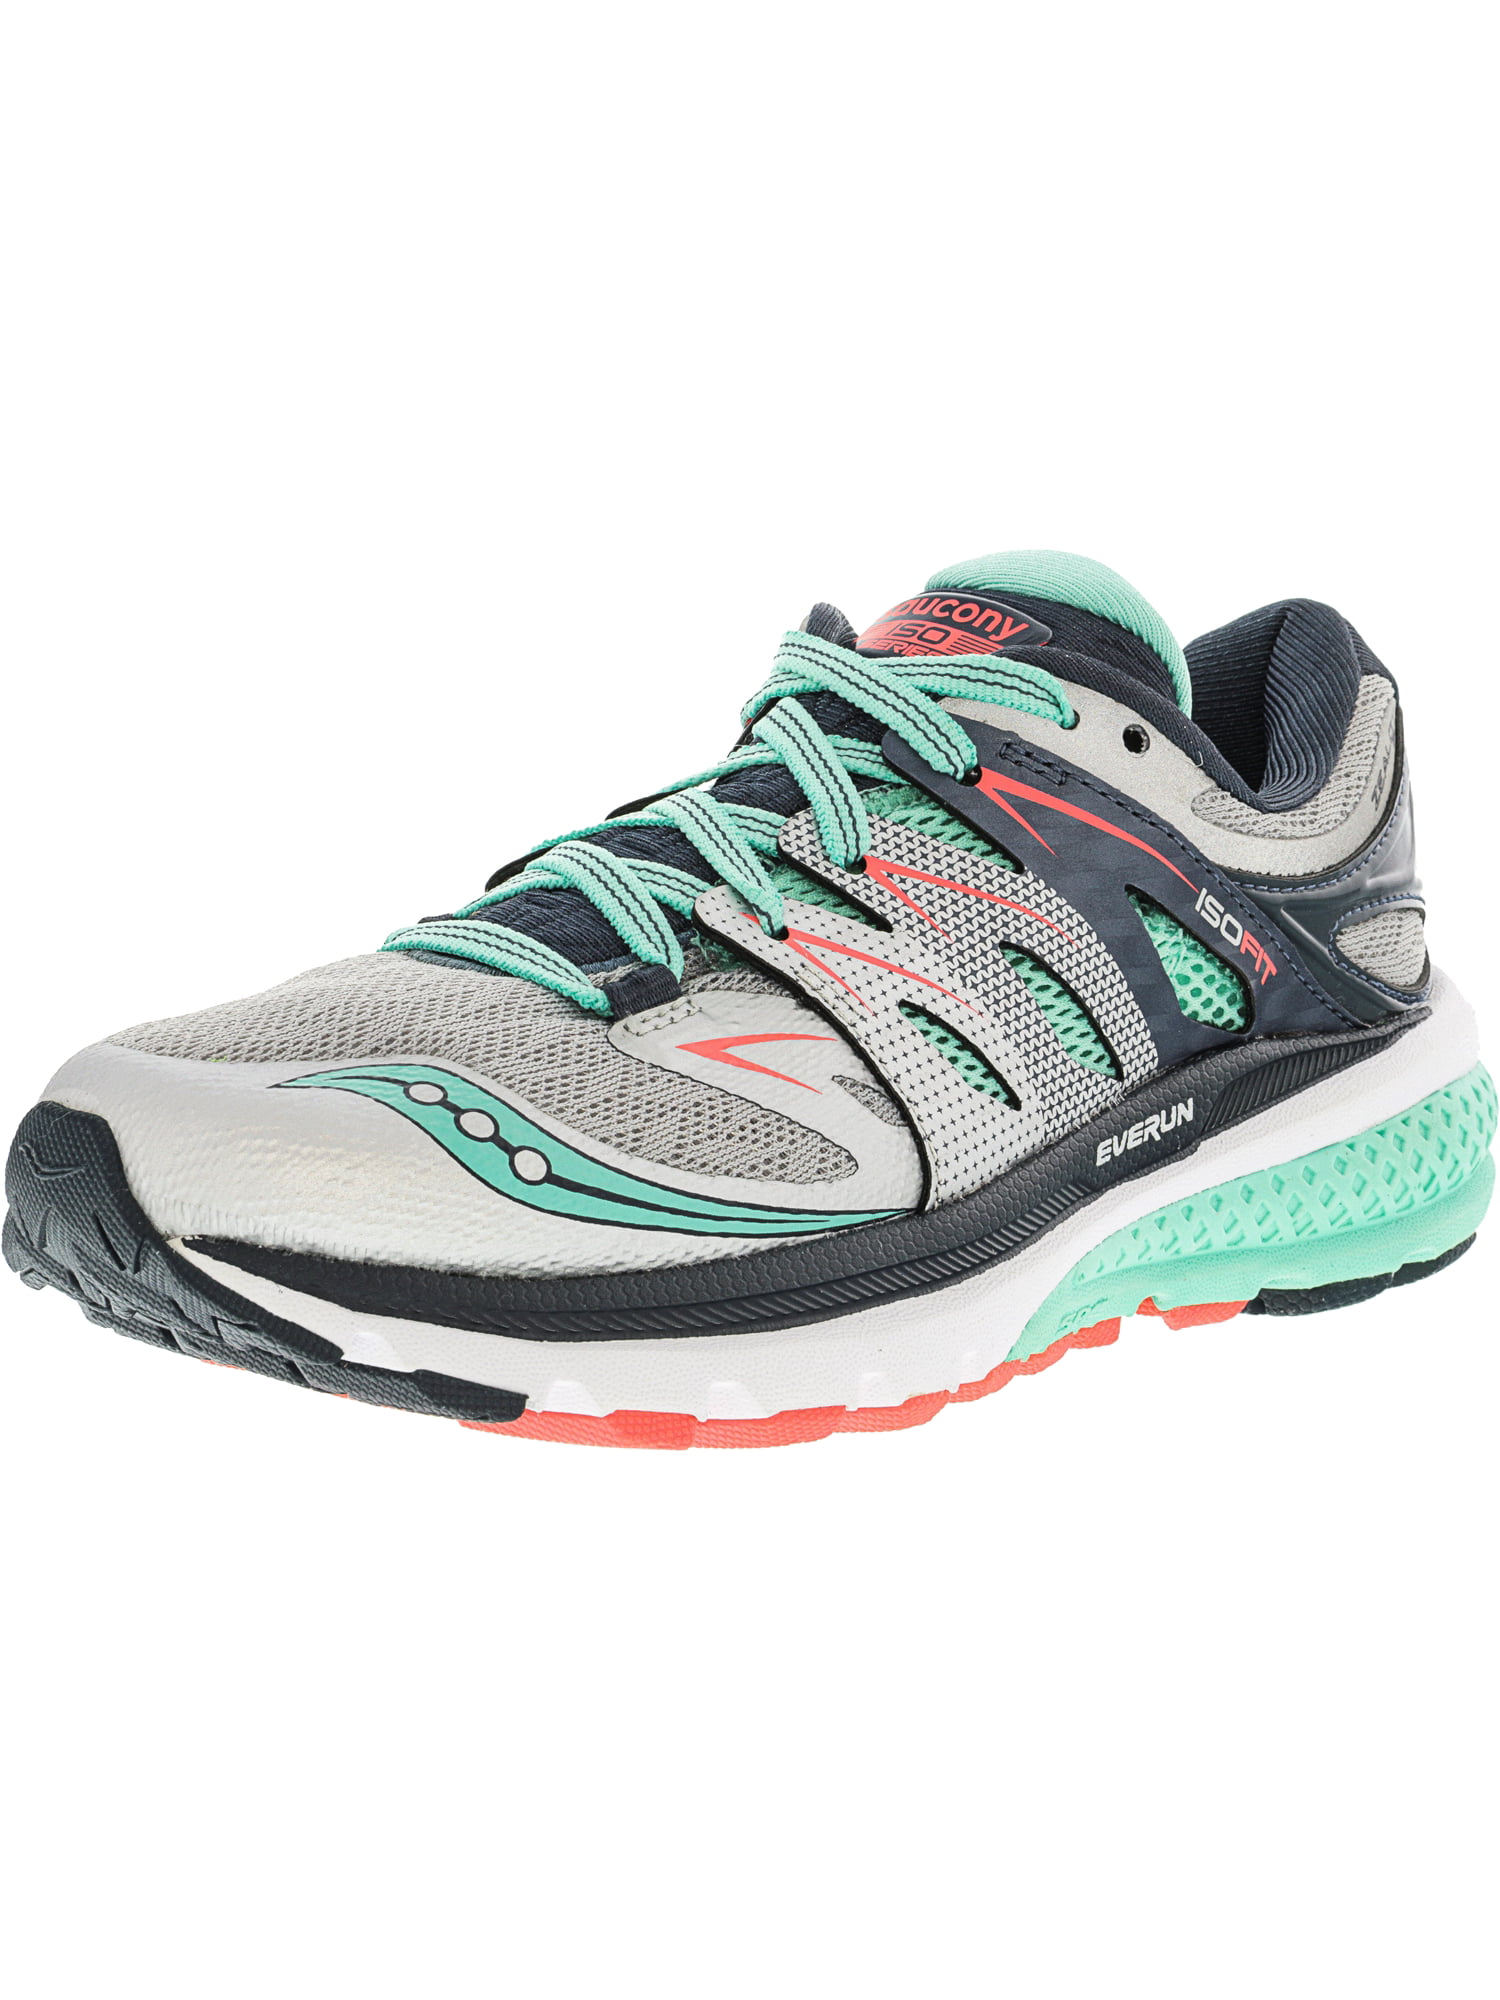 Mint Coral Ankle-High Running Shoe 